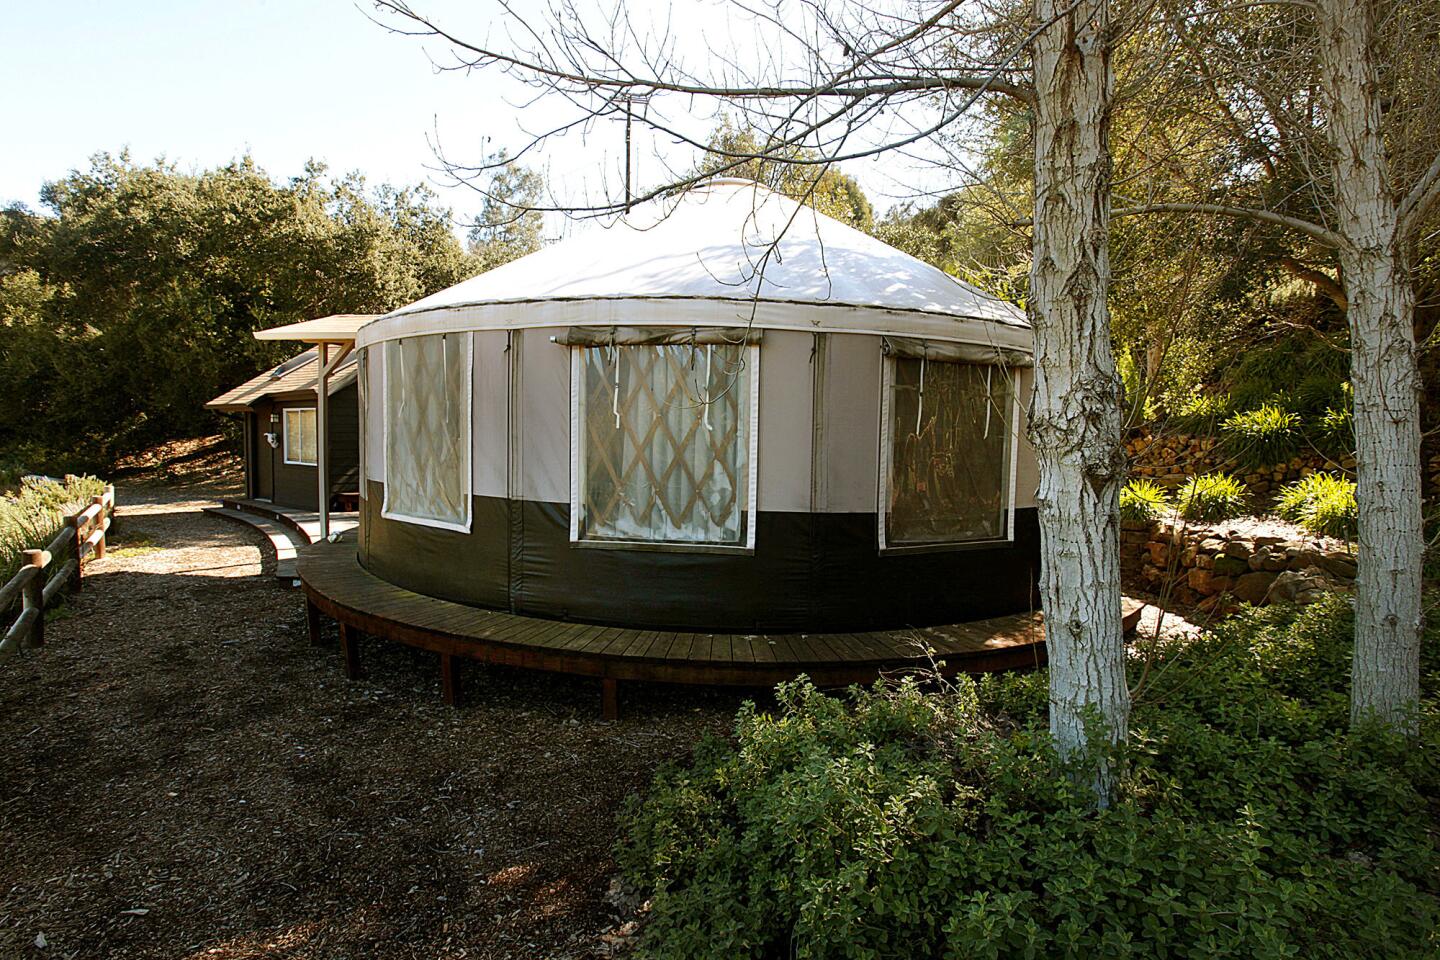 My Favorite Room | Incubus frontman Brandon Boyd finds peace in a yurt